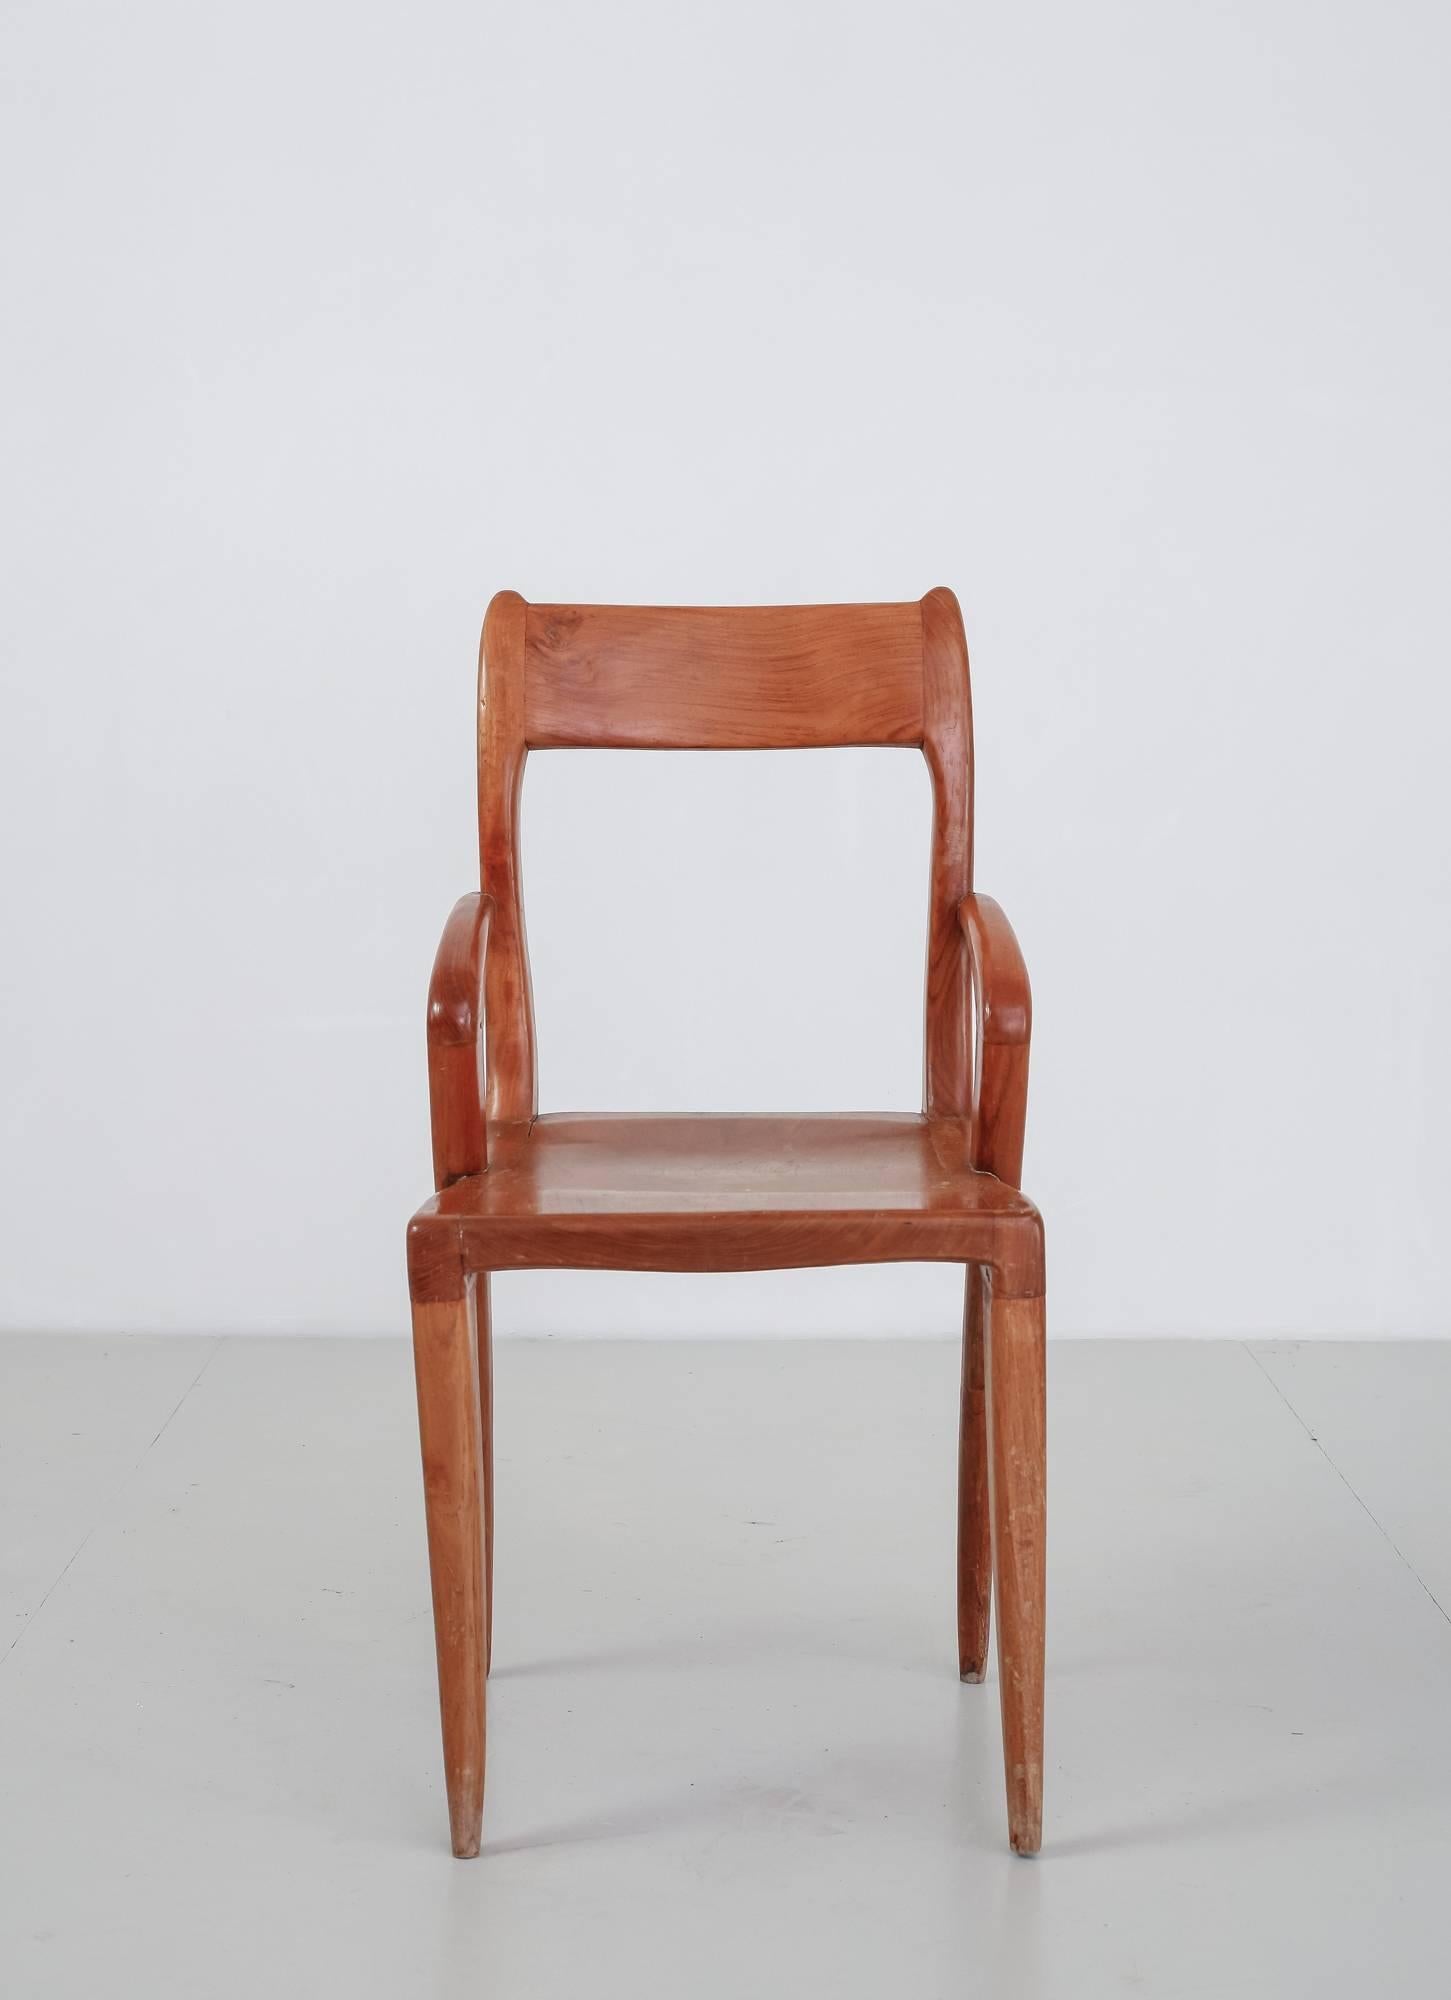 American Sculptural, Organic Wooden Craft Chair, 1950s In Good Condition For Sale In Maastricht, NL